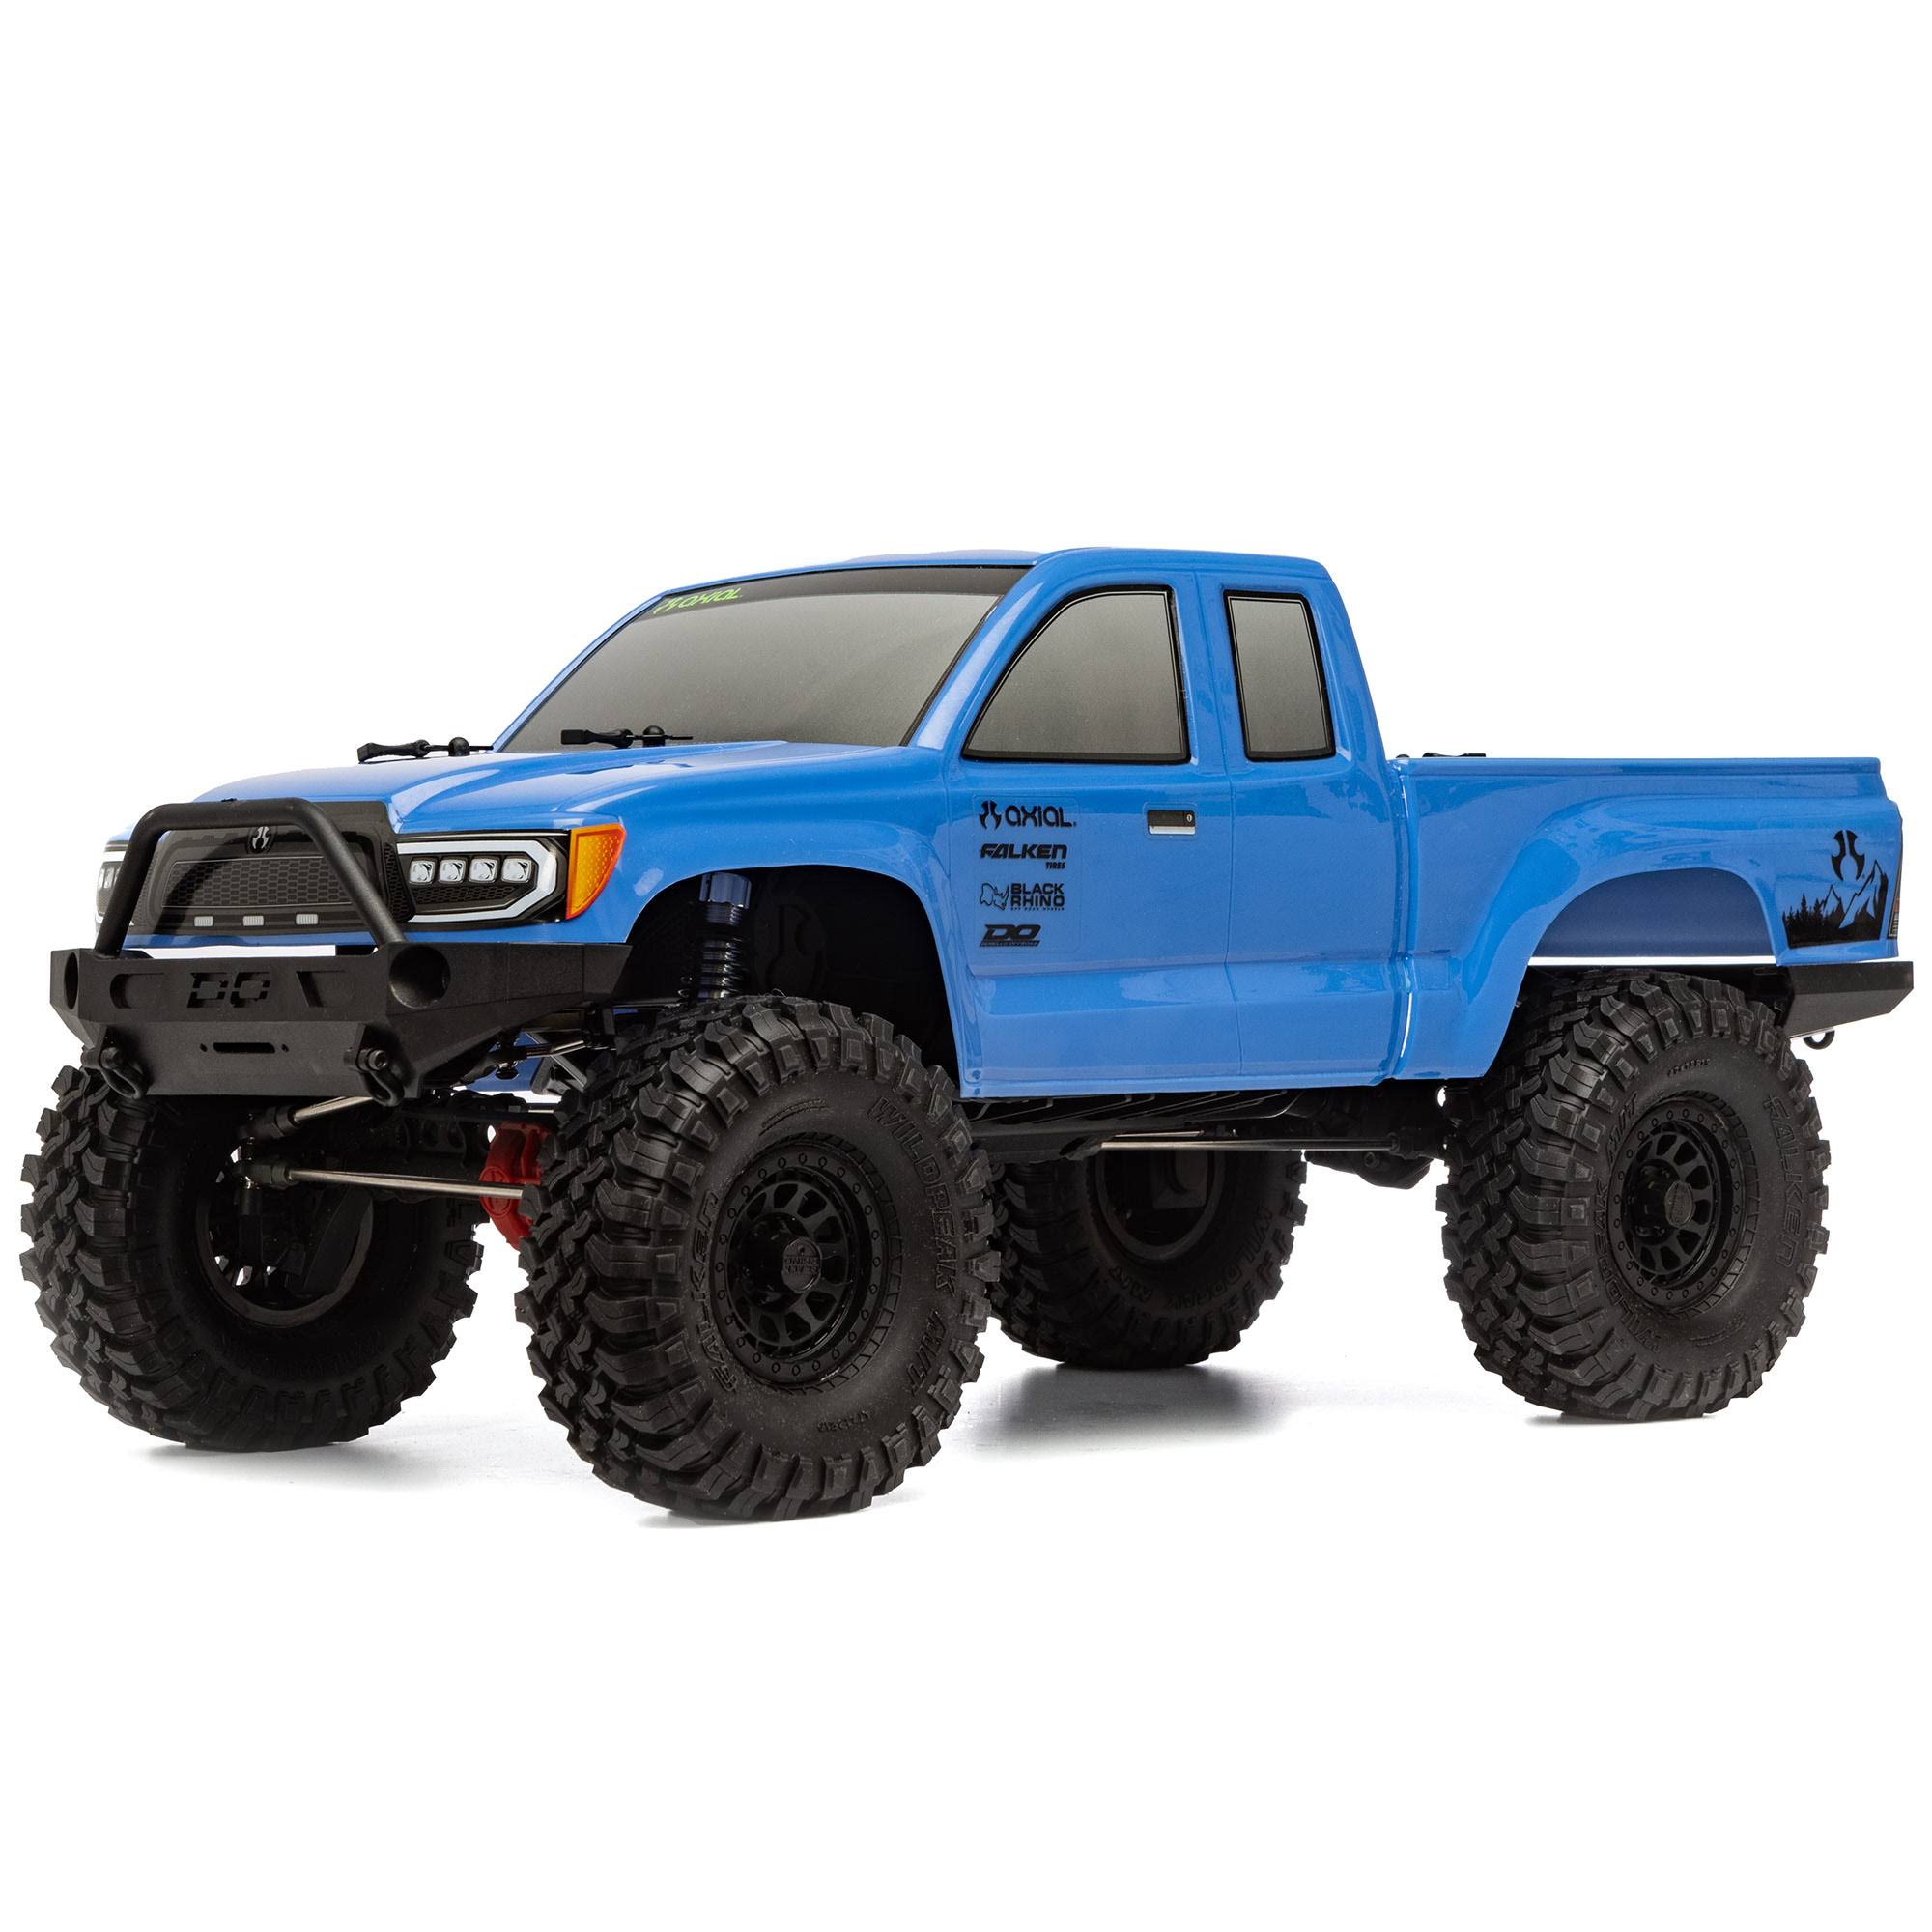 Axial 1/10 SCX10 III Base Camp 4WD Rock Crawler Brushed RTR Blue (C-Axi03027T1)